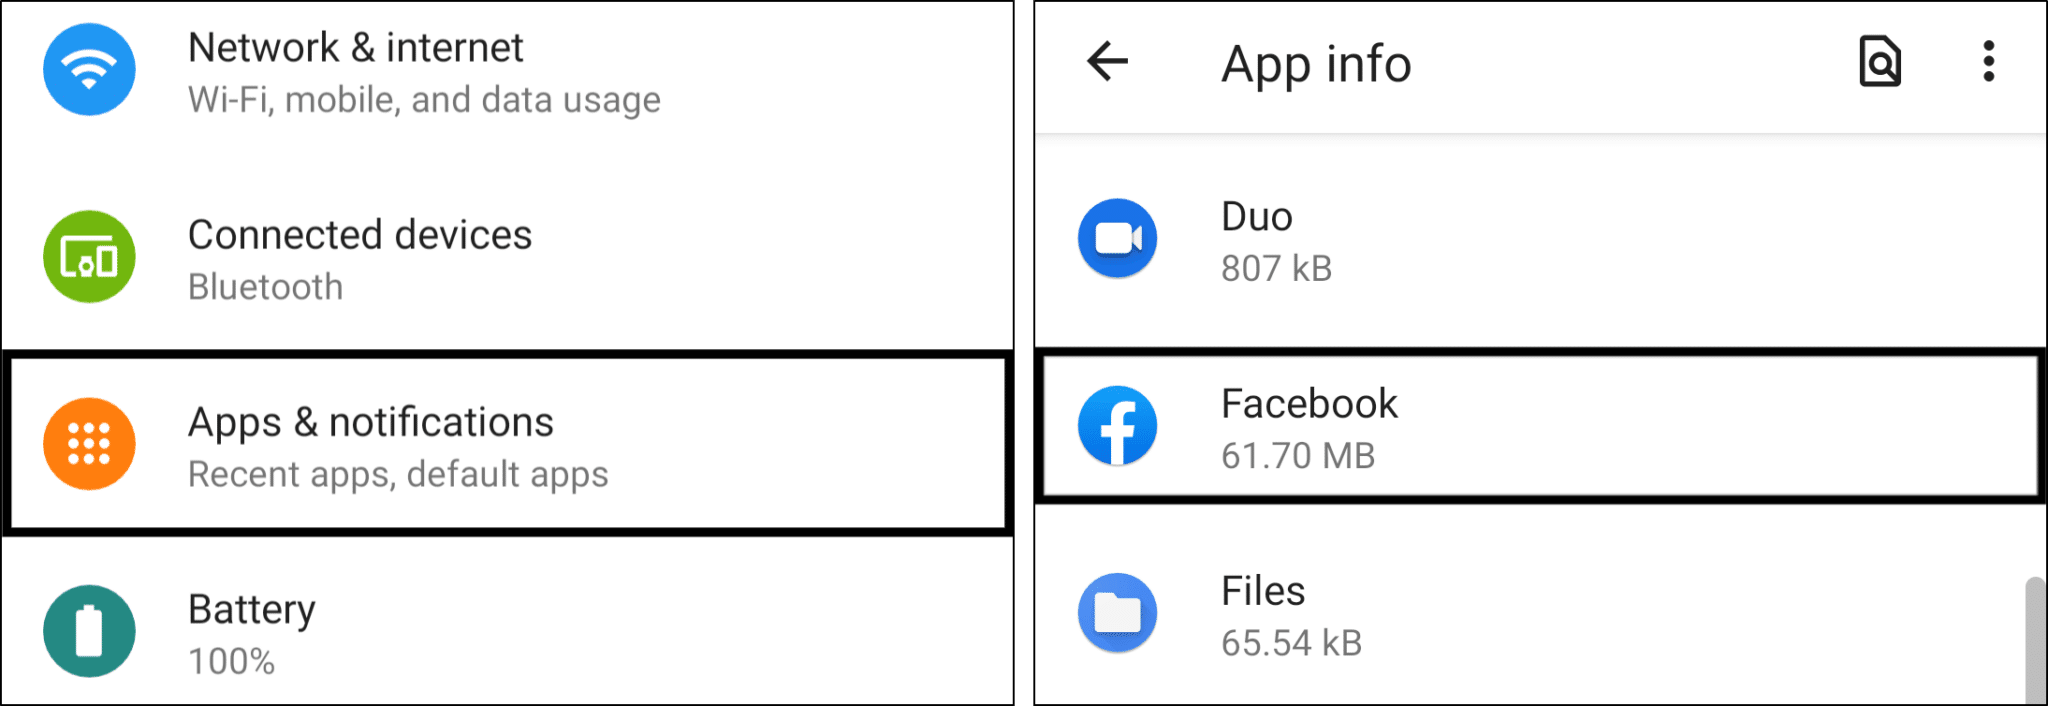 access Facebook app settings in system settings on Android to clear cache and data and fix Facebook pictures, images, photos not loading or showing